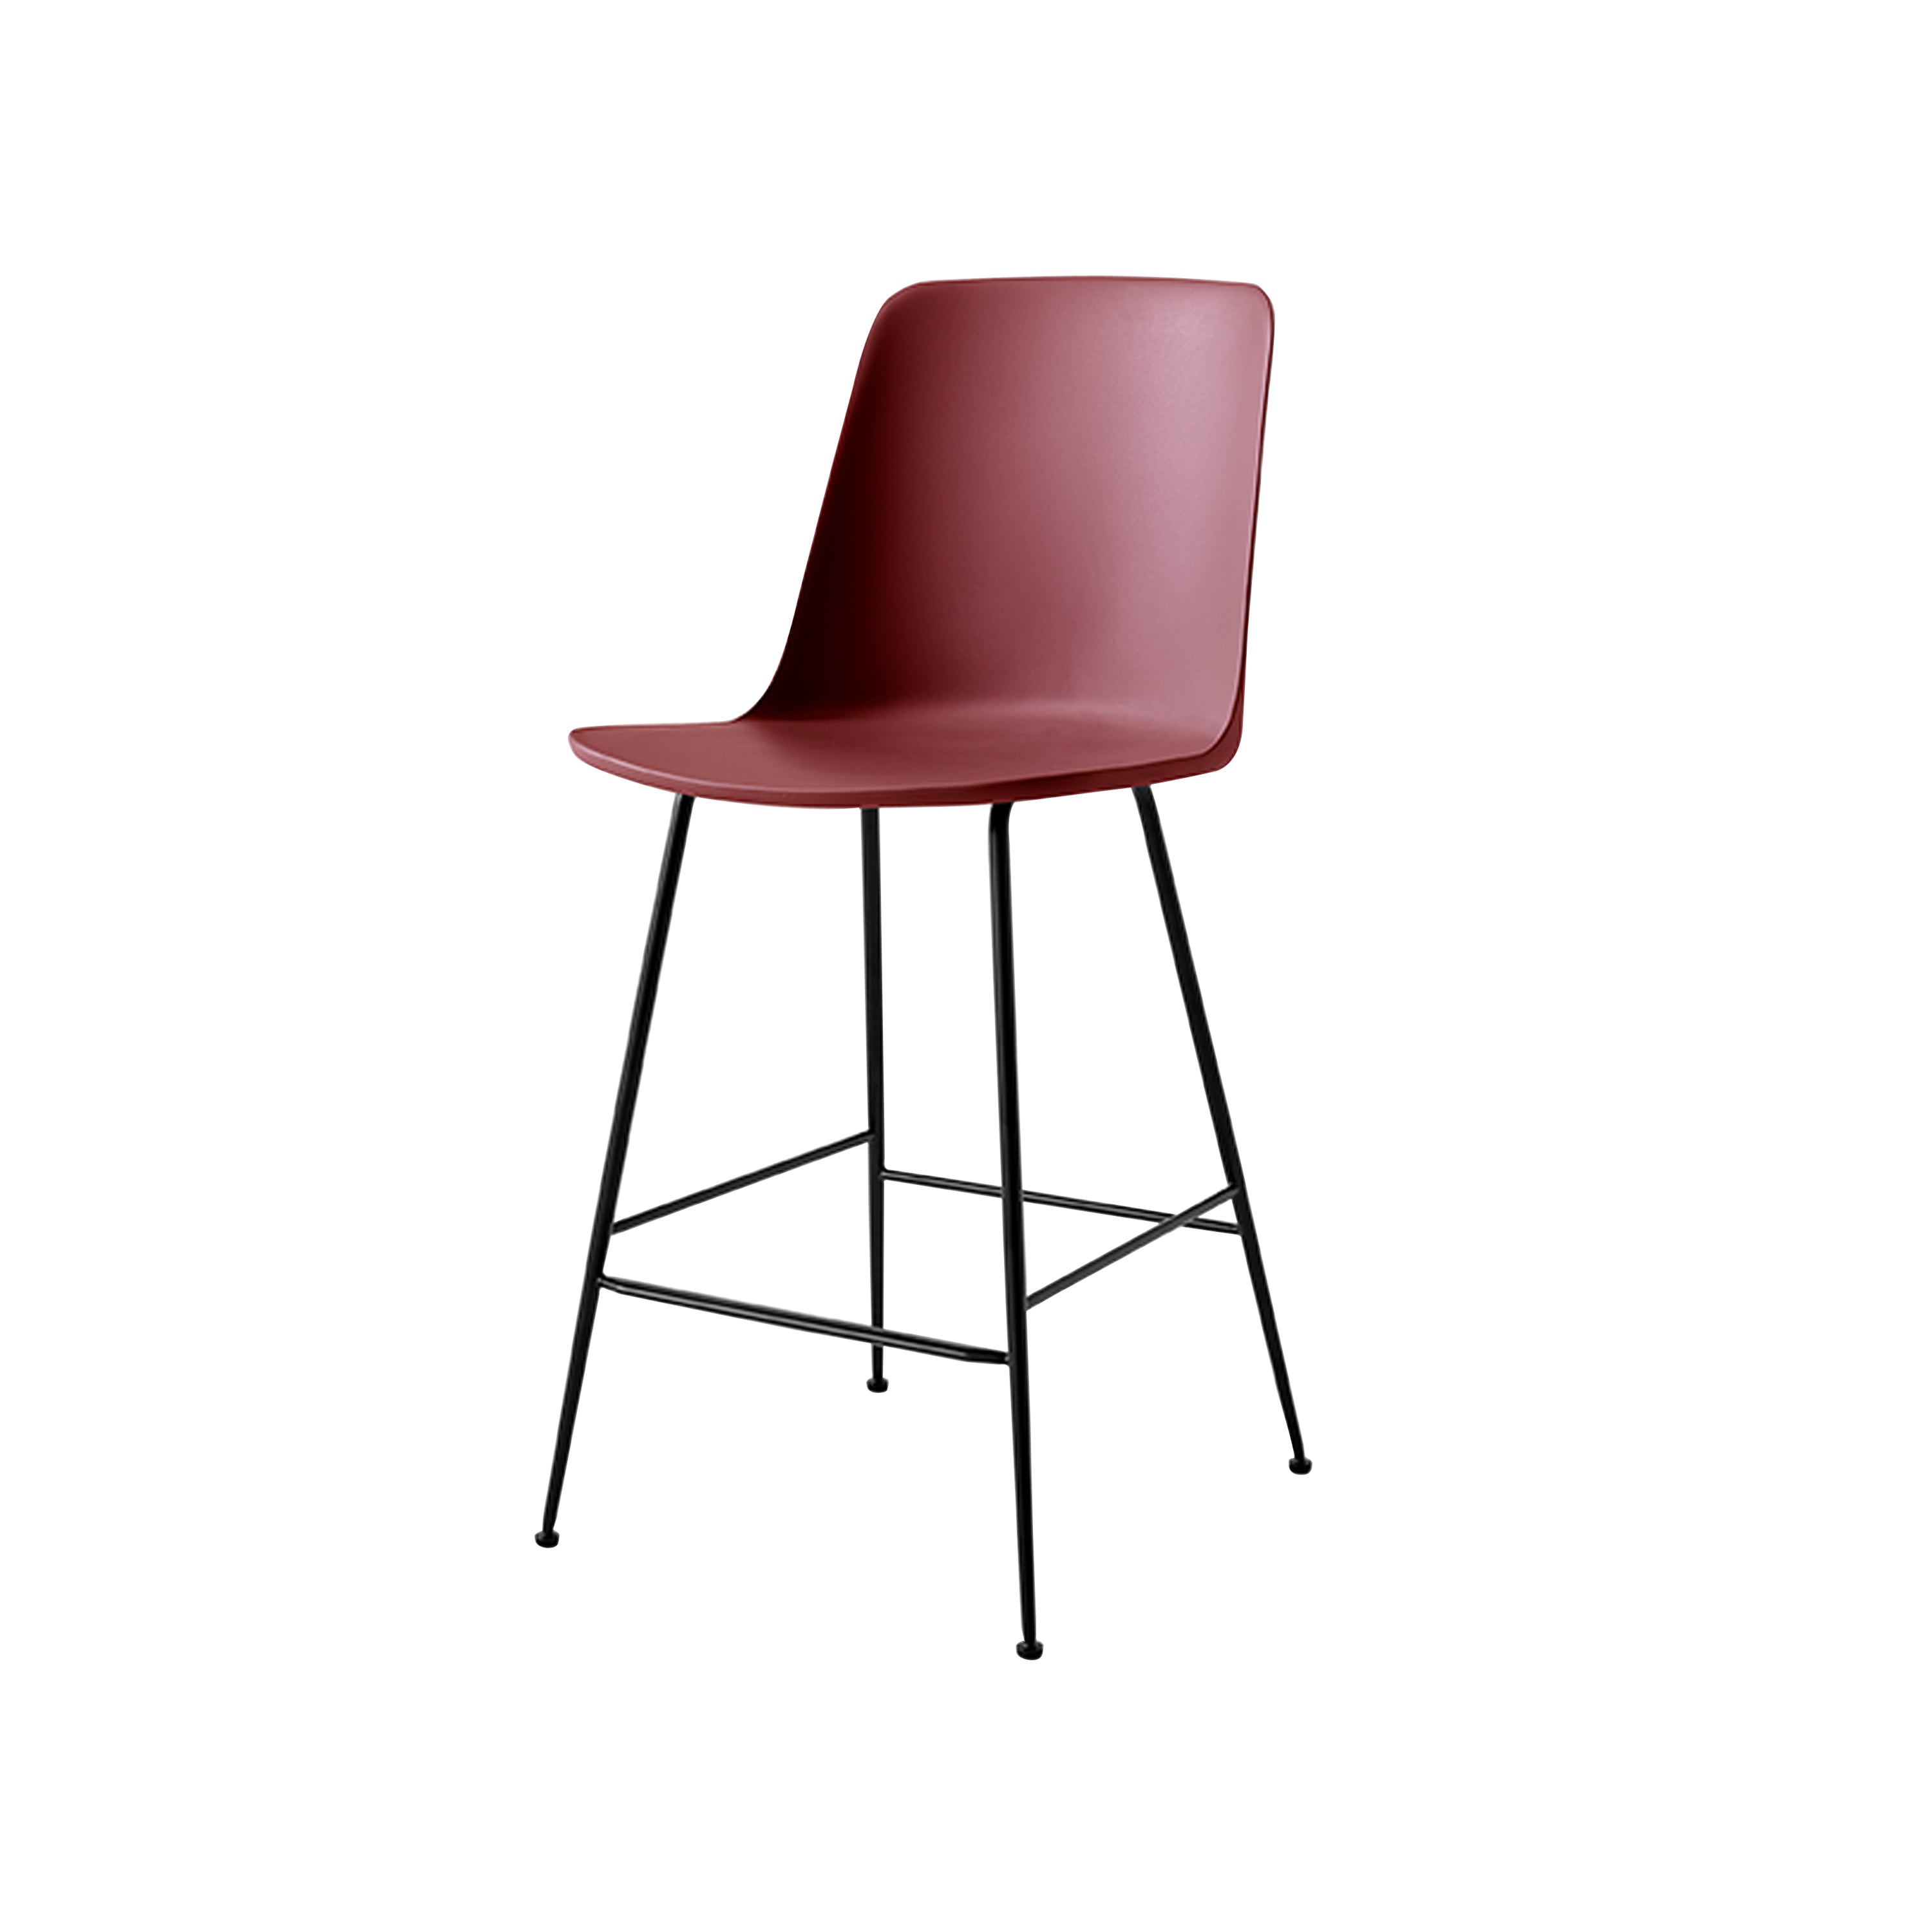 Rely Bar + Counter Highback Chair: HW91 + HW96 + Counter (HW91) + Red Brown + Black